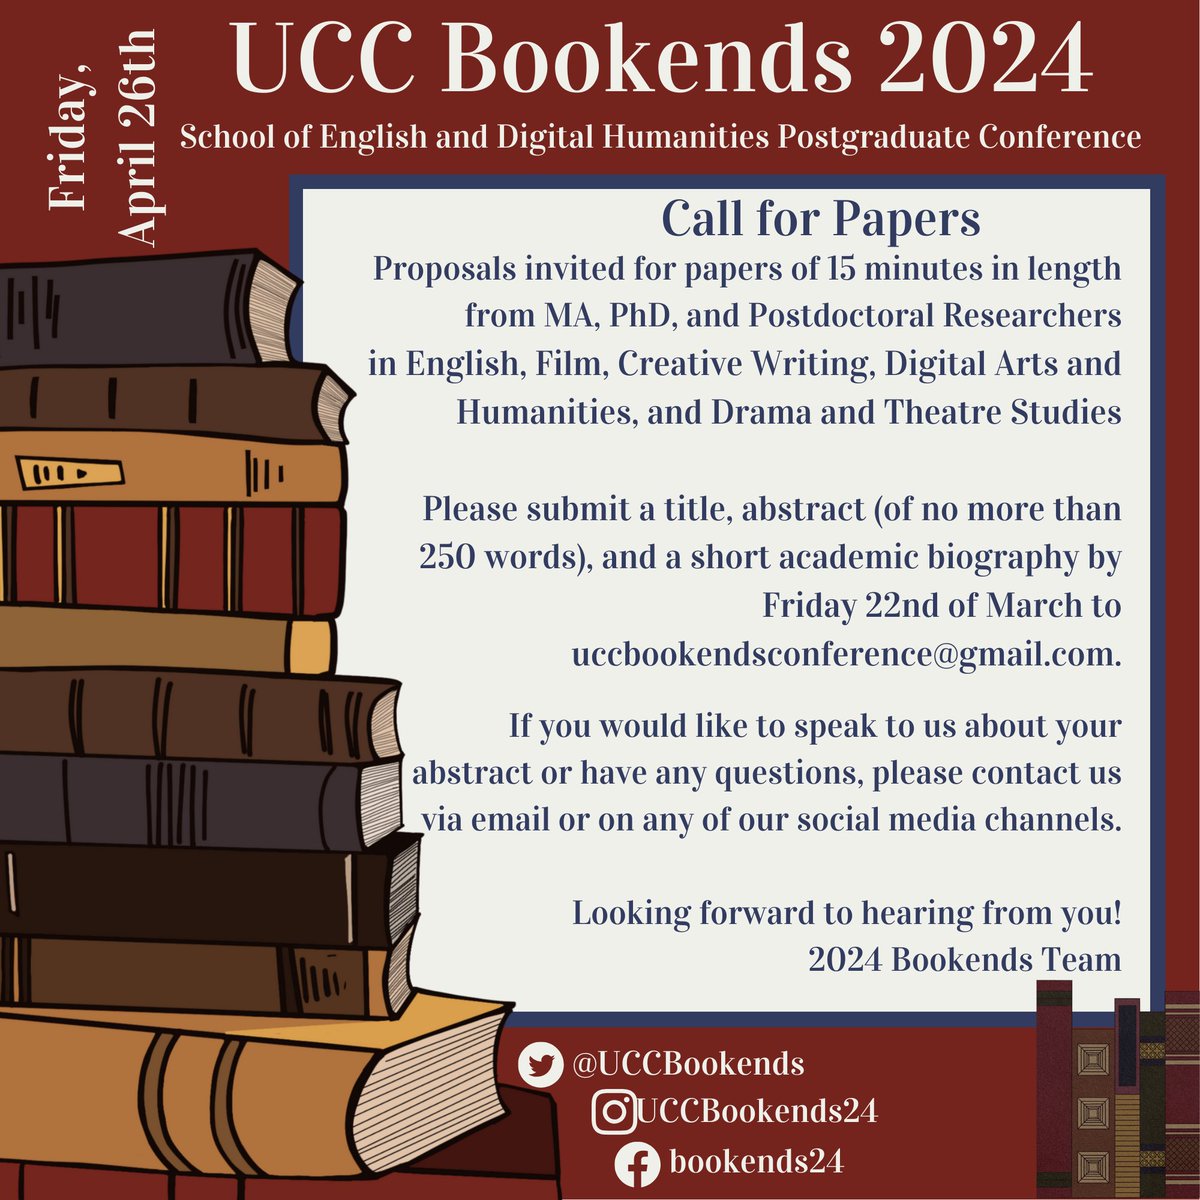 It's almost time for @UCCBookends, our fantastic annual postgraduate conference. Closing date for proposals is March 22nd, and the event is open to MA, PhD and postdoctoral researchers. @CACSSS1